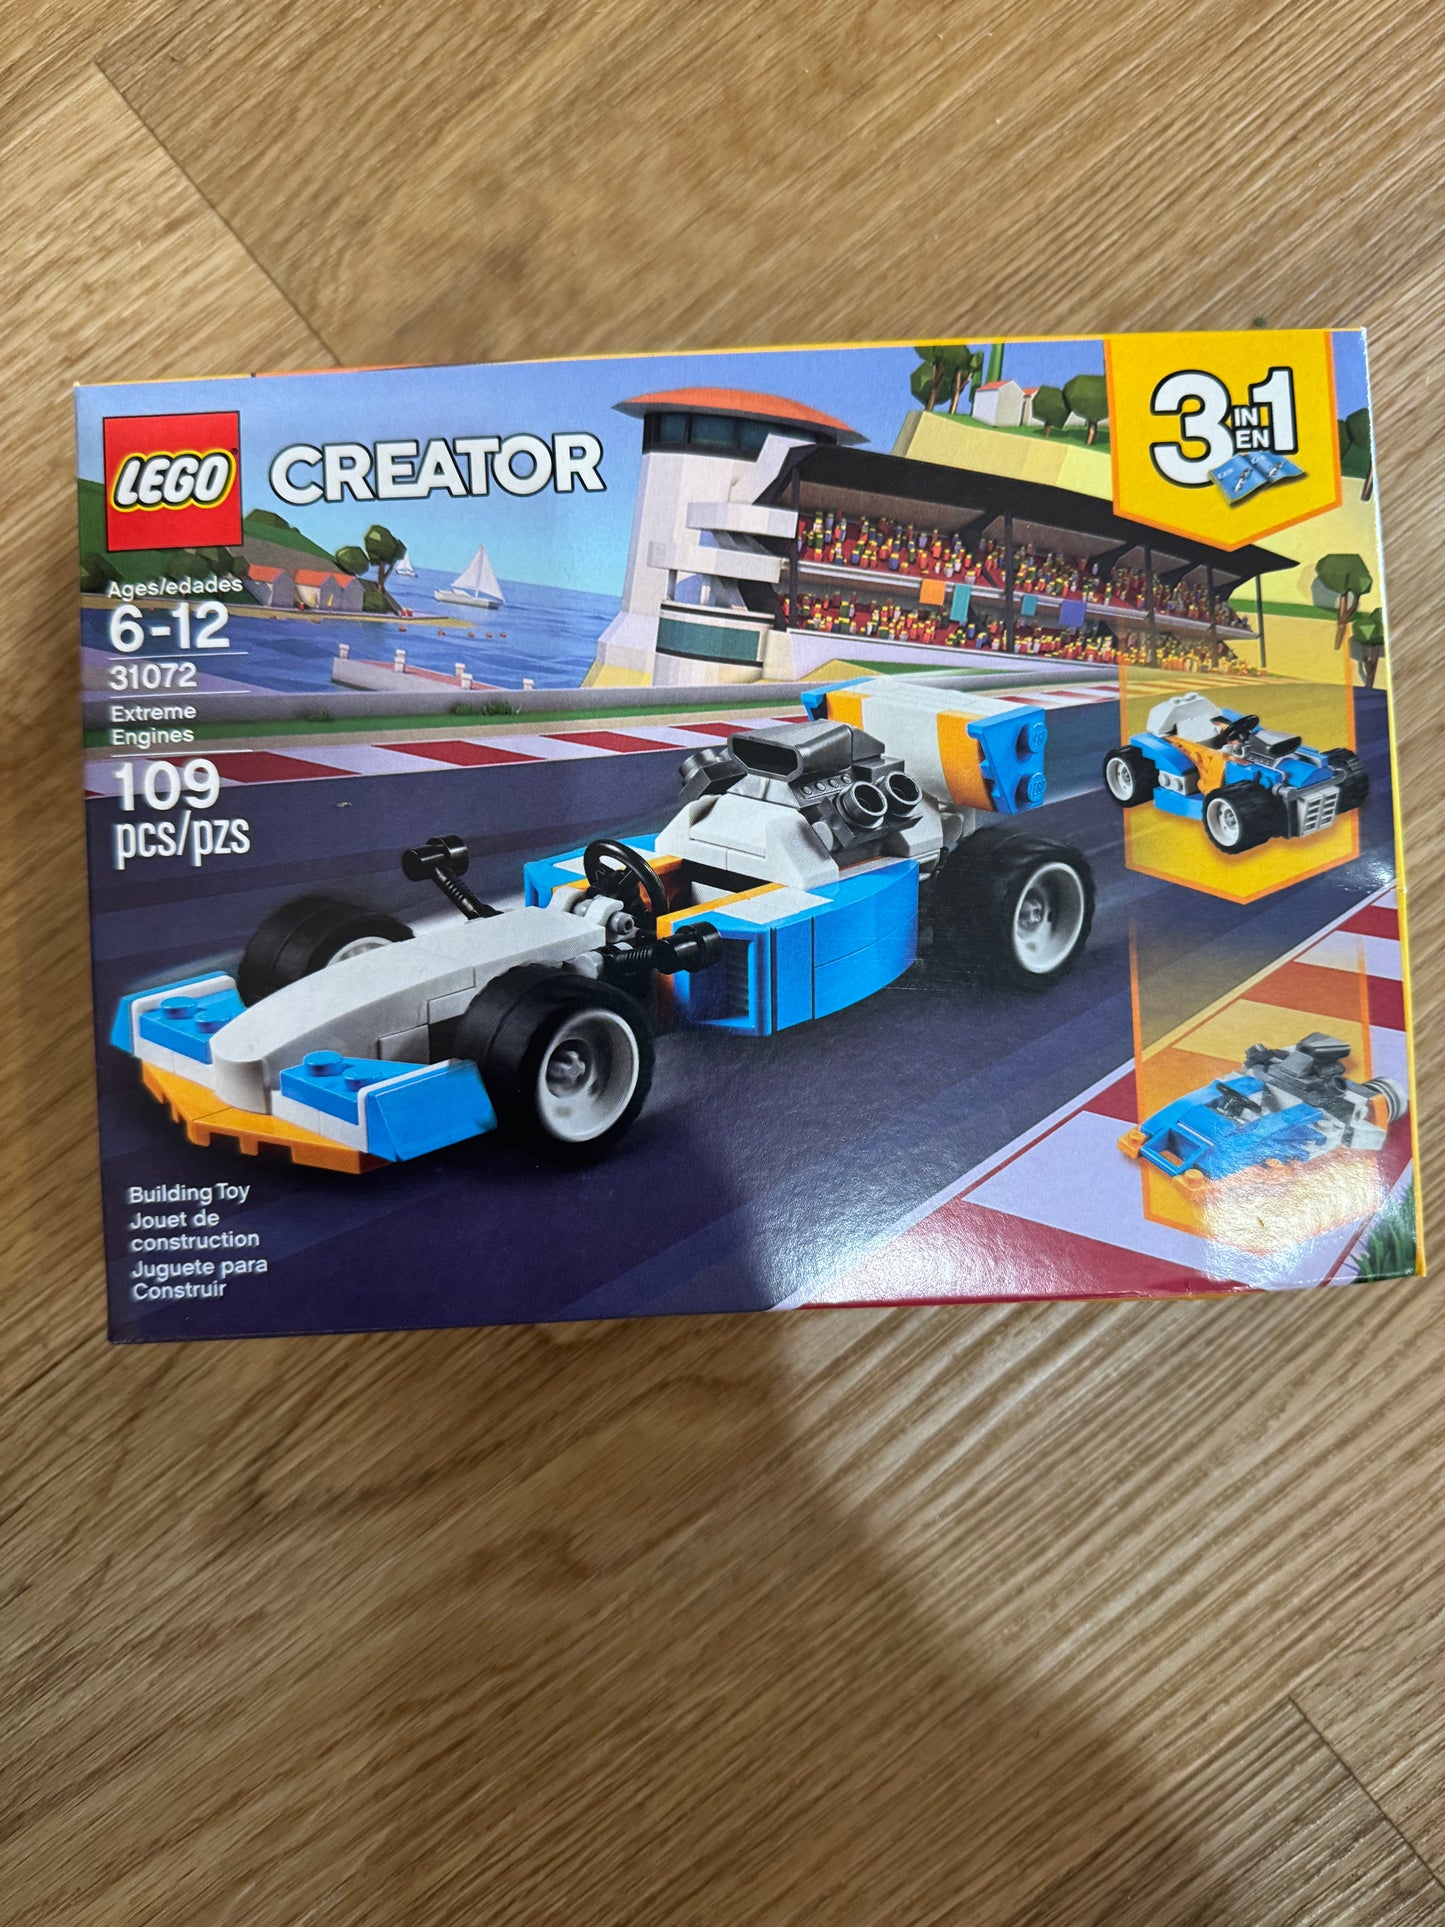 LEGO CREATOR 3 in 1- EXTREME ENGINES